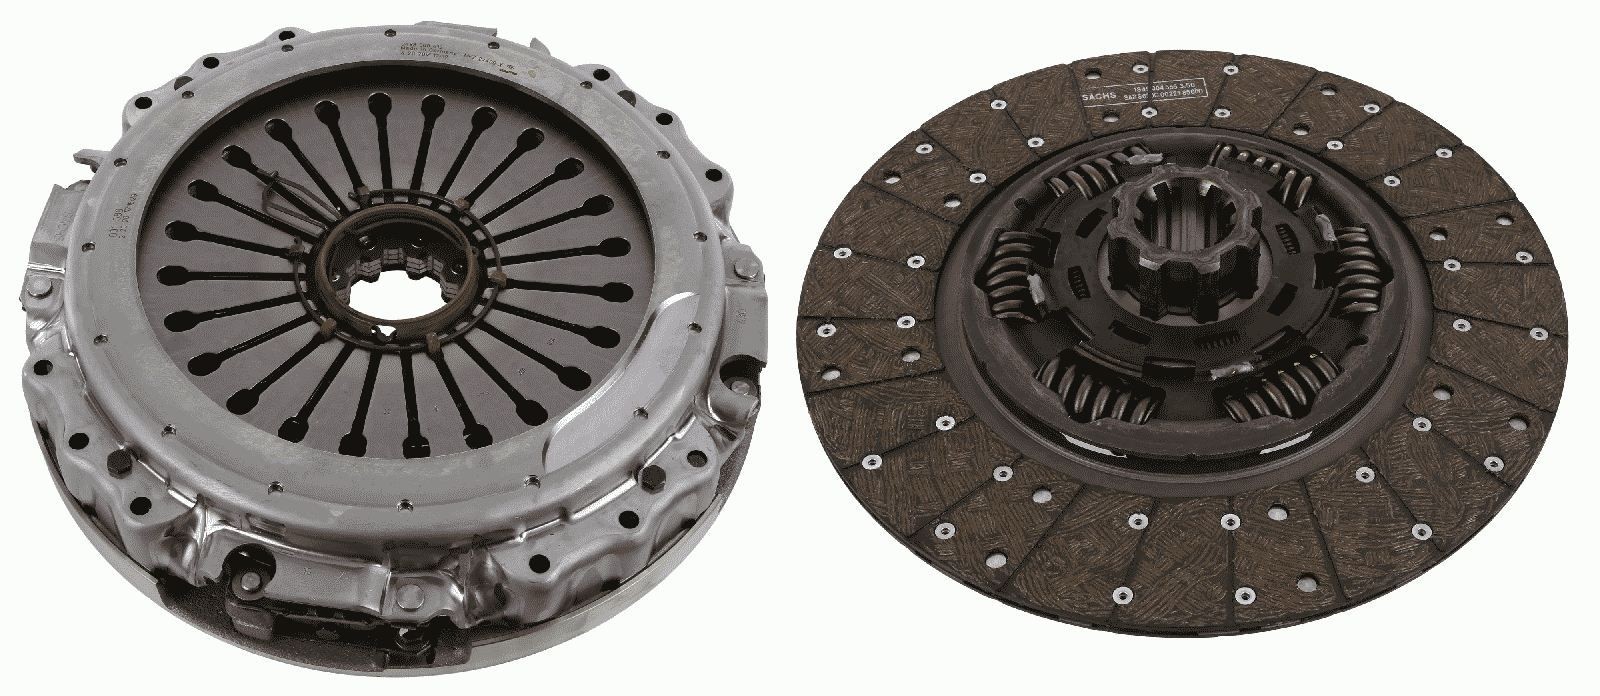 SACHS without clutch release bearing, 400mm Ø: 400mm Clutch replacement kit 3400 700 677 buy